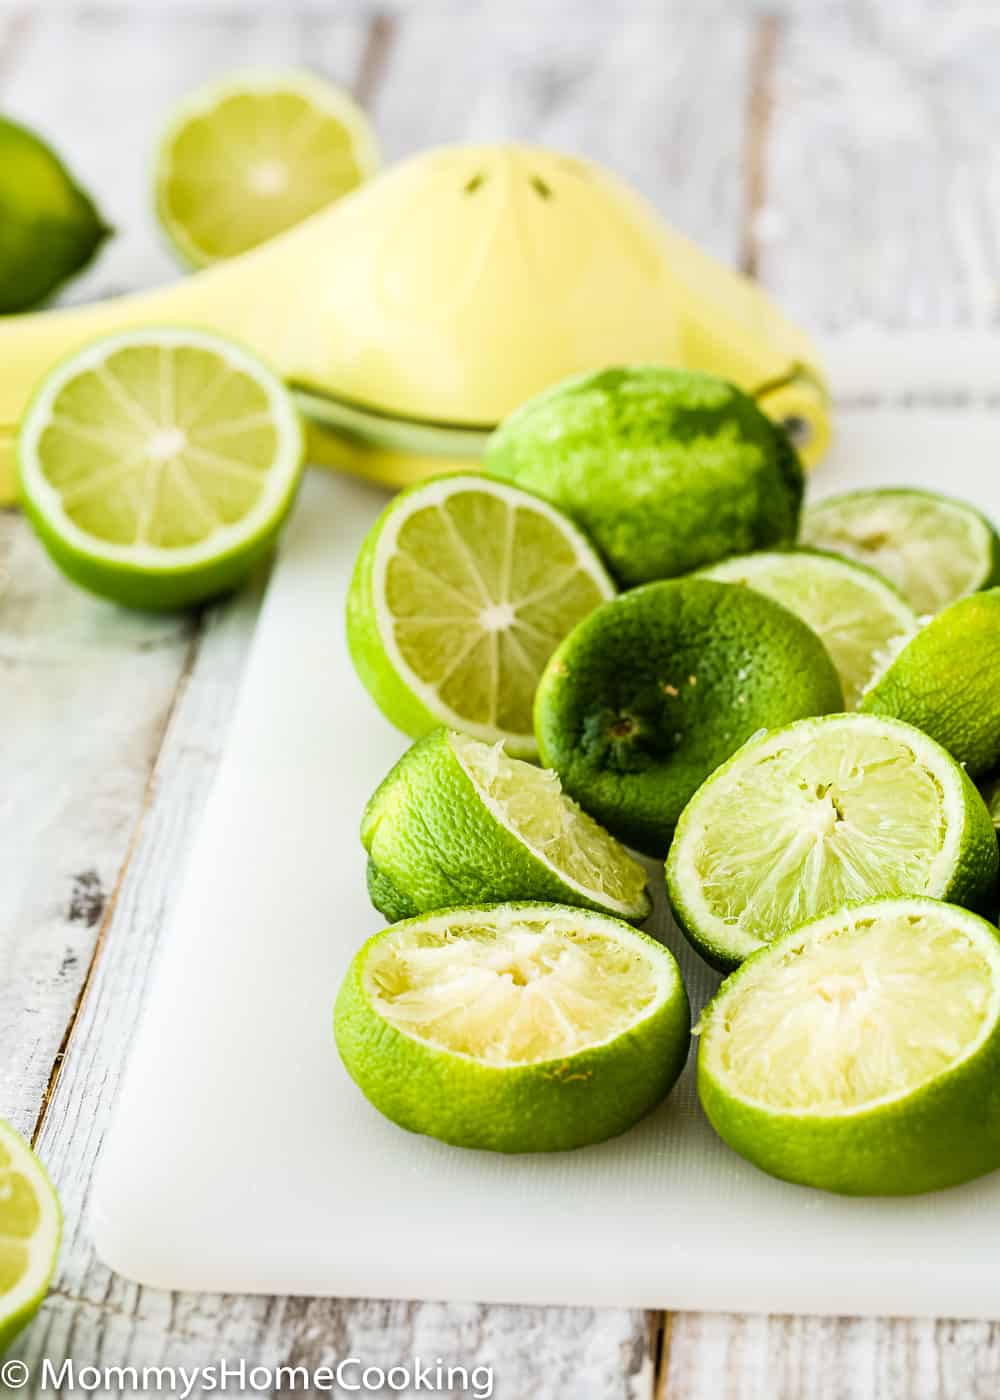 many squeezed limes over a cutting board